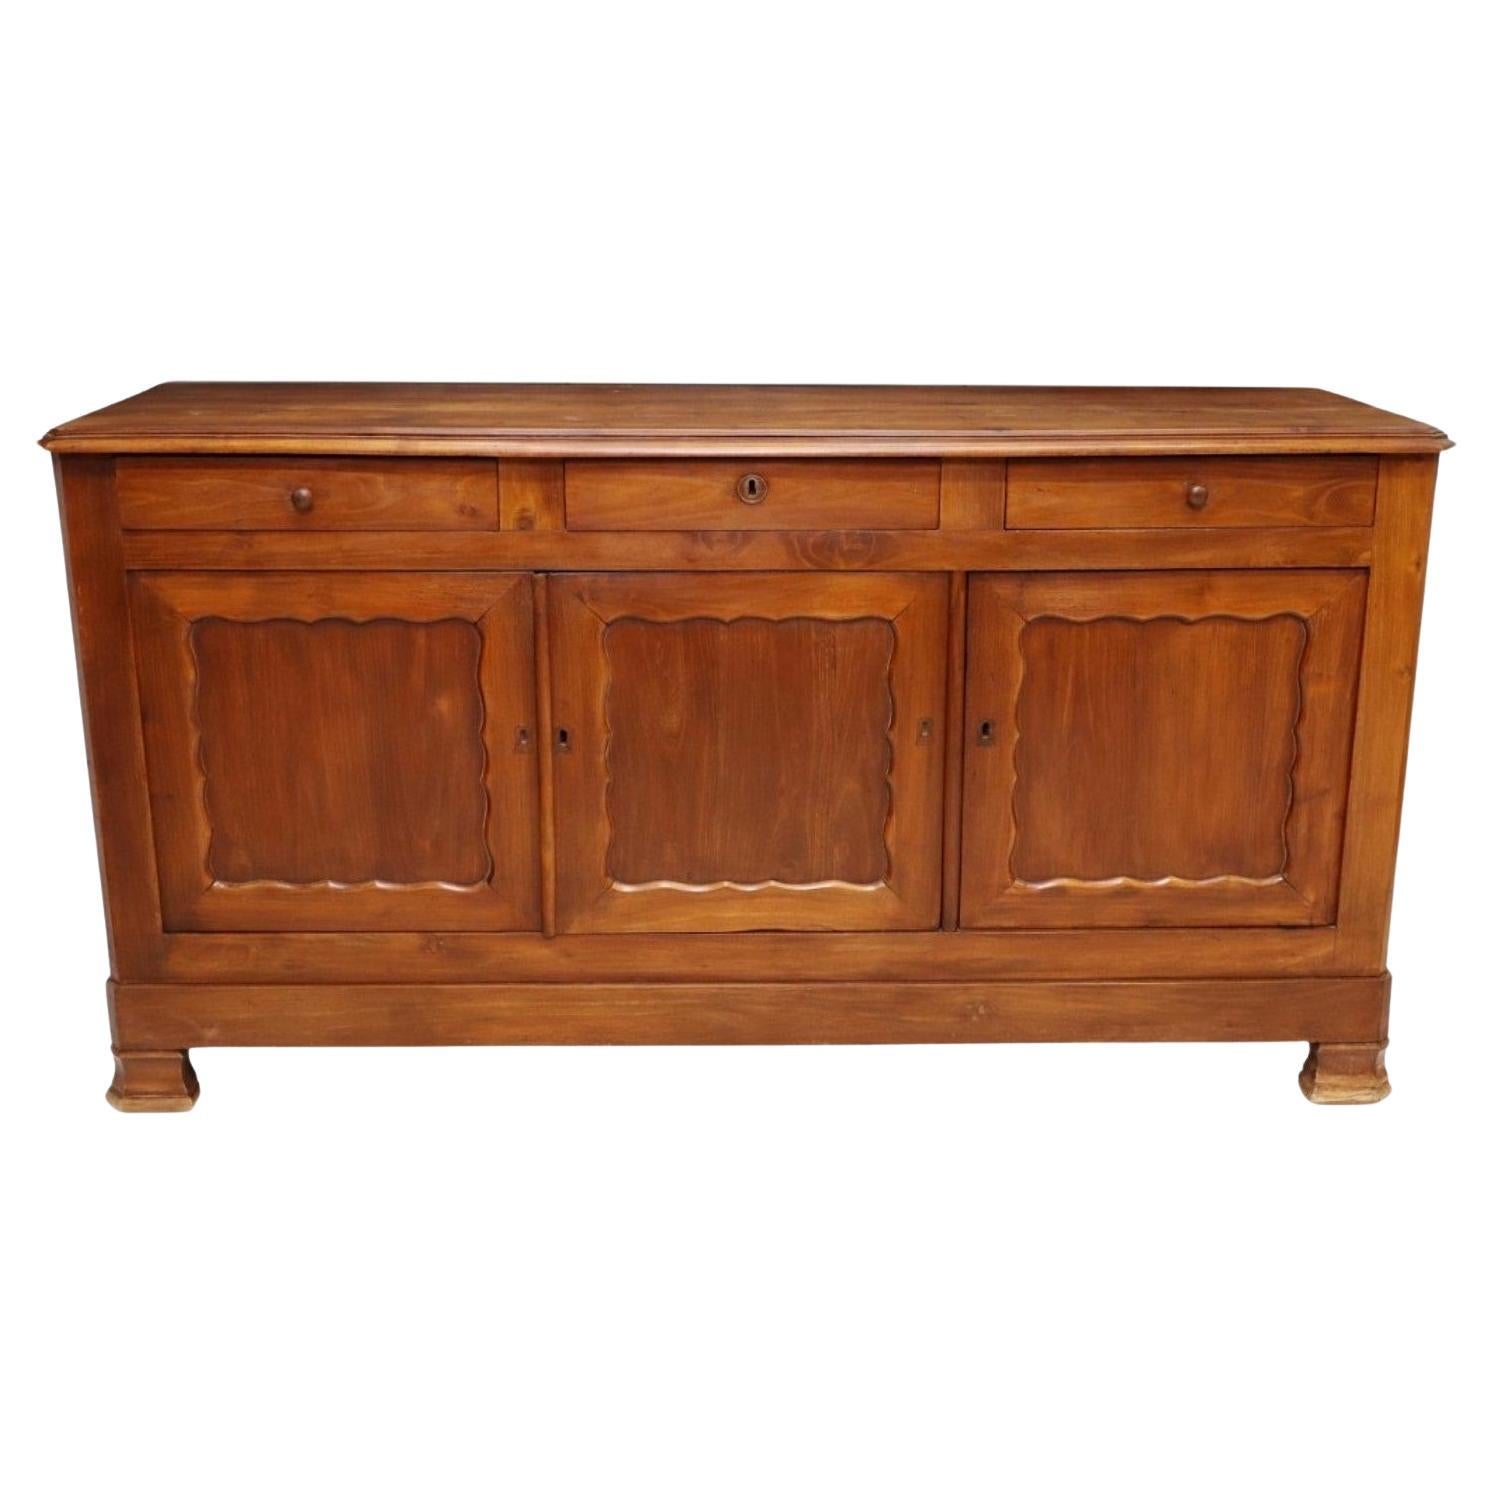 19th Century Country French Provincial Fruitwood Sideboard 